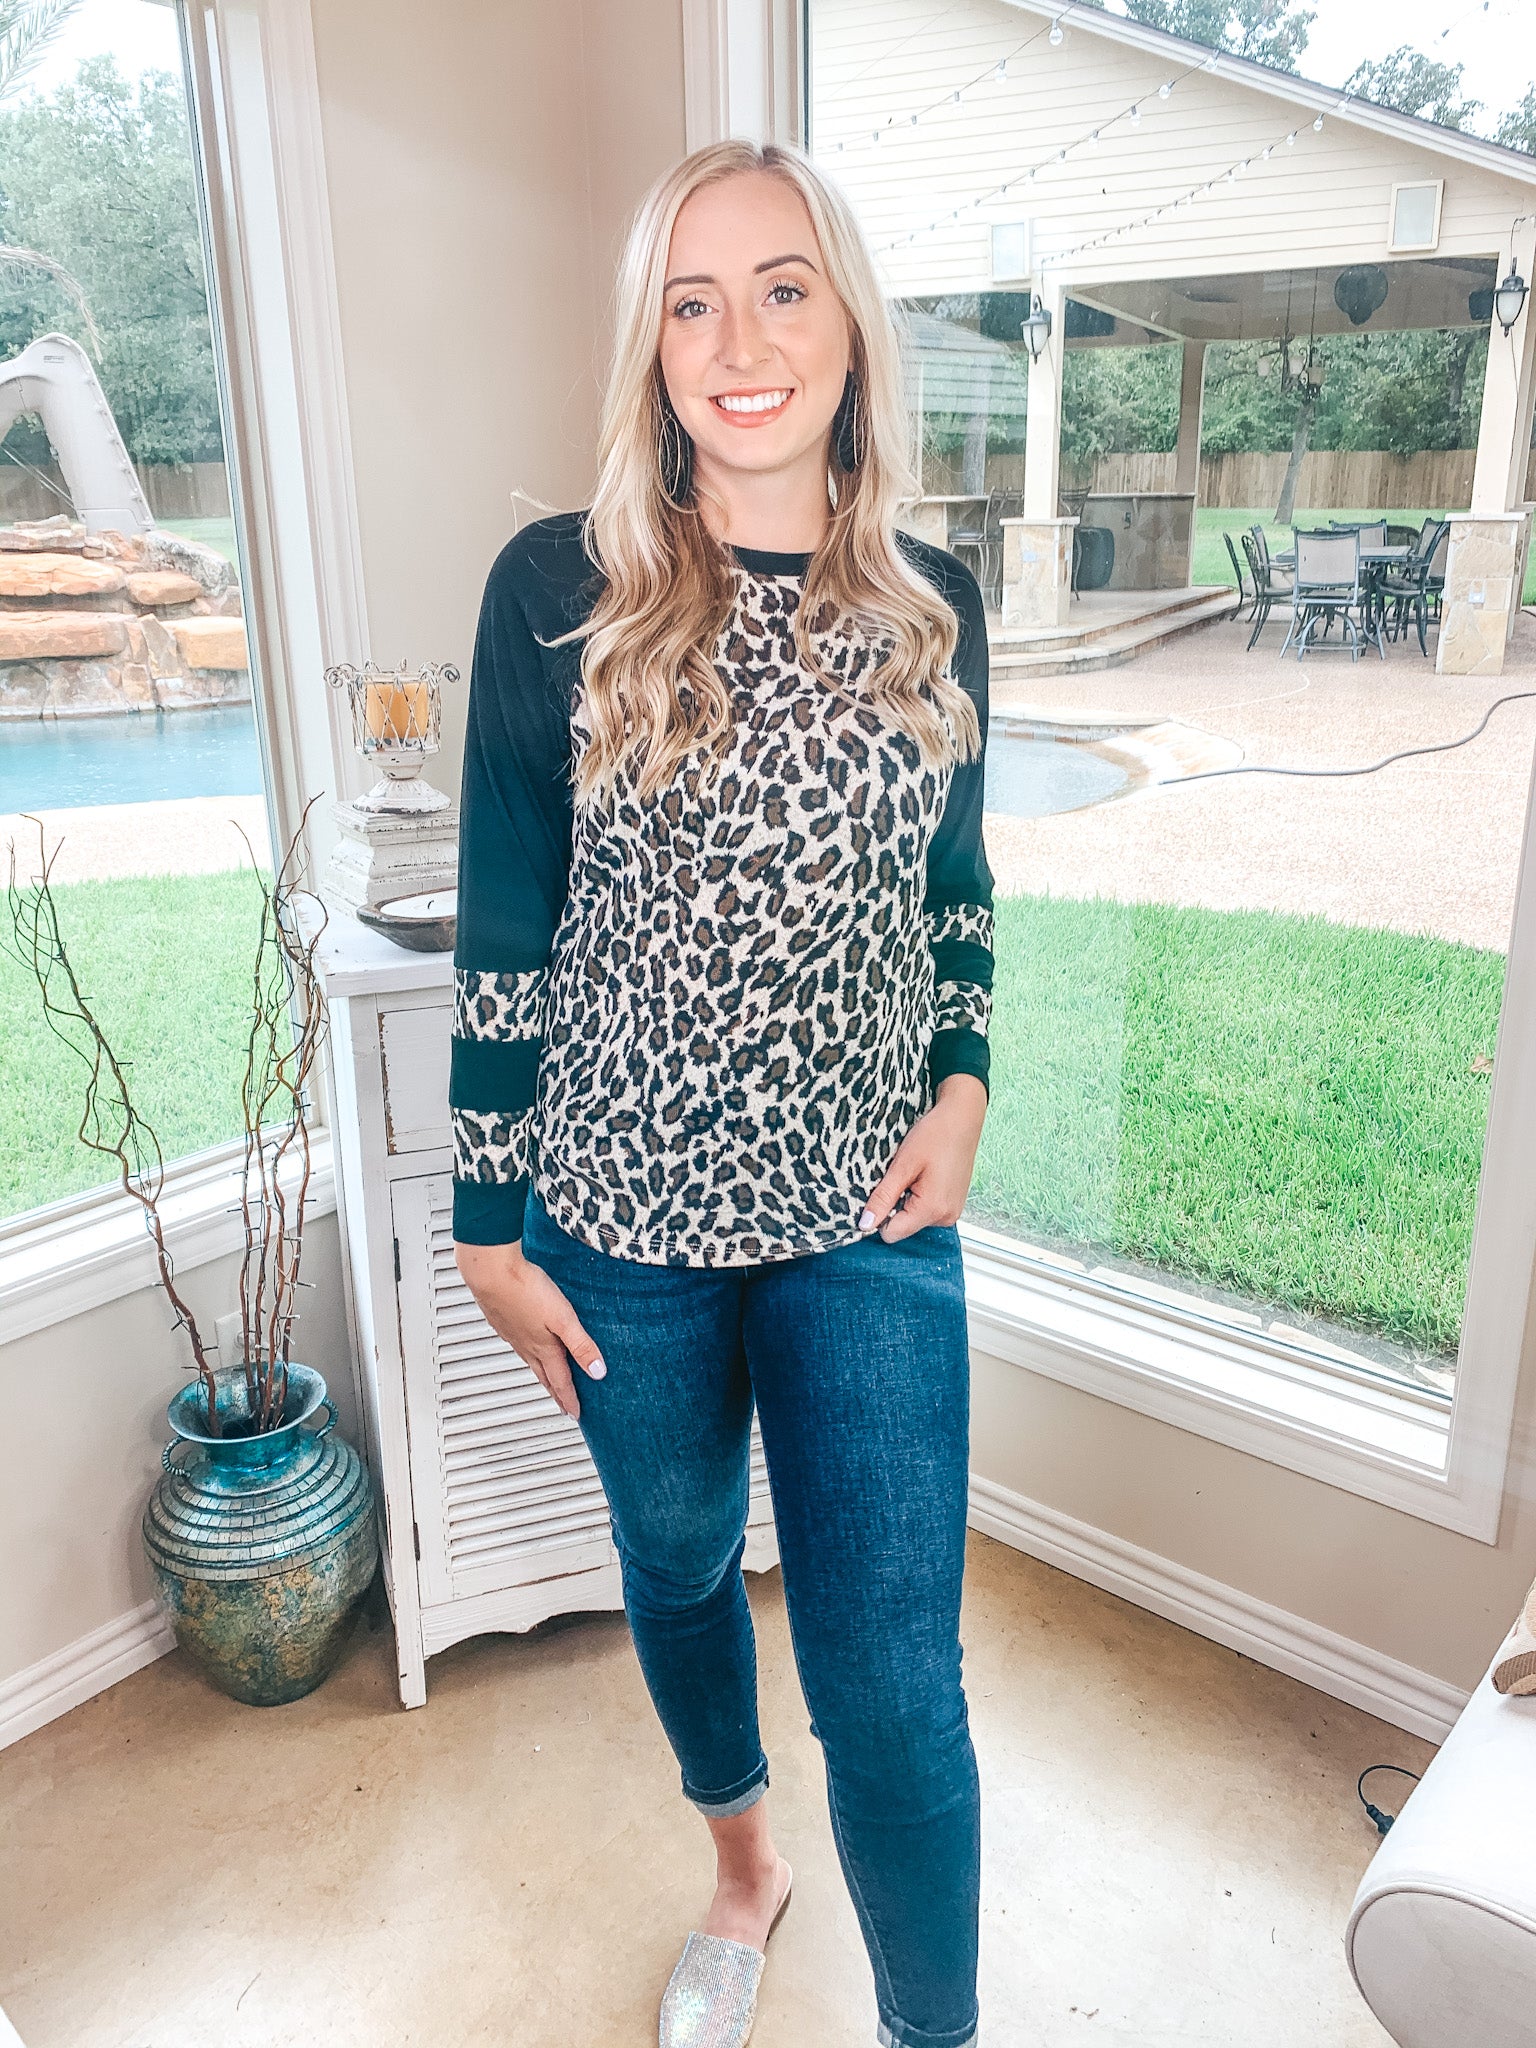 Earning Your Spots Leopard Long Sleeve Top with Color Block Sleeves in Black - Giddy Up Glamour Boutique